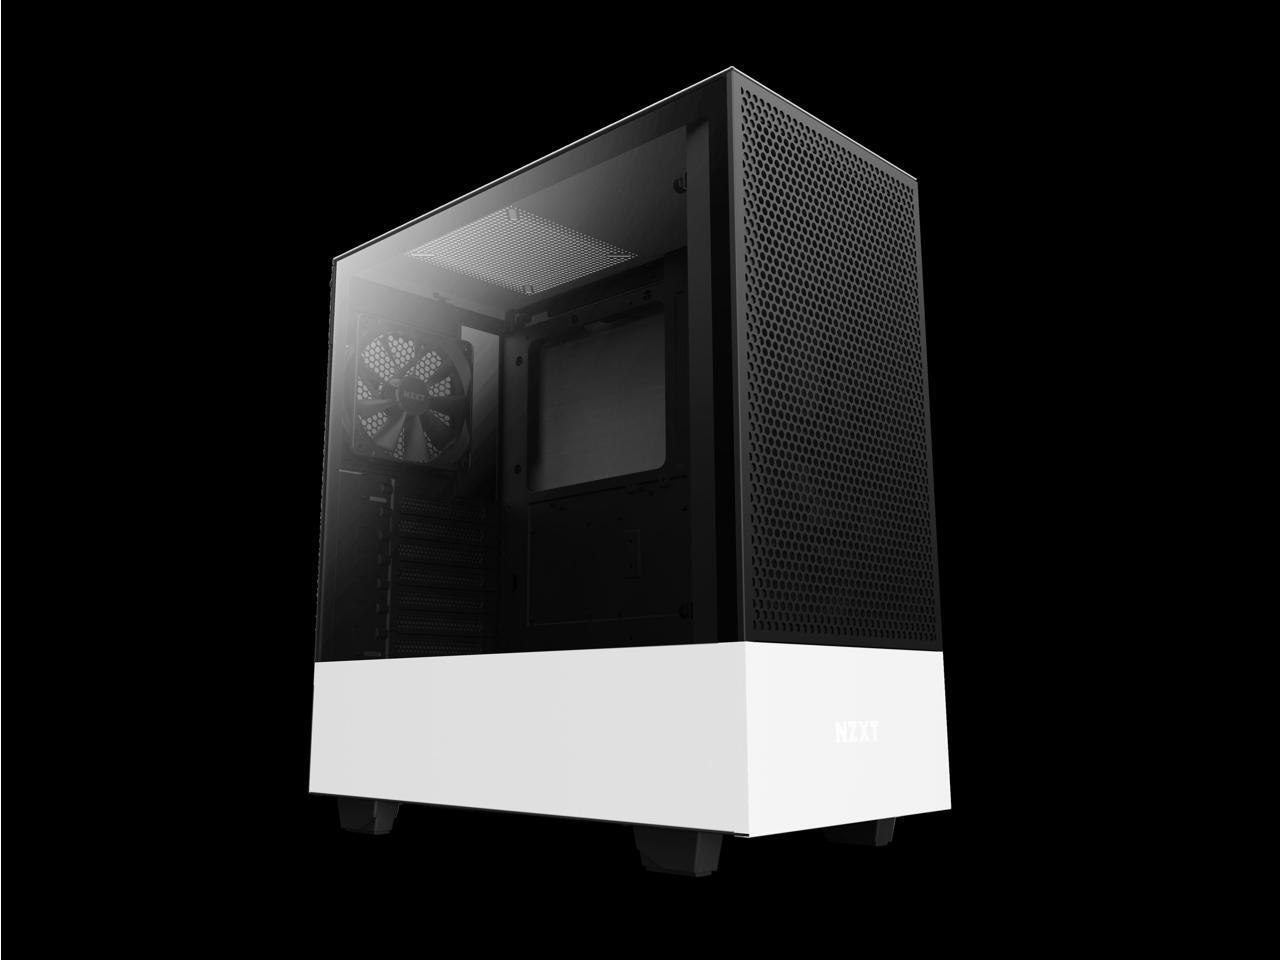 NZXT H510 Flow Matte White - Compact Atx PC Gaming Case - Tempered Glass - Enhanced Cable Management - Water-Cooling Ready